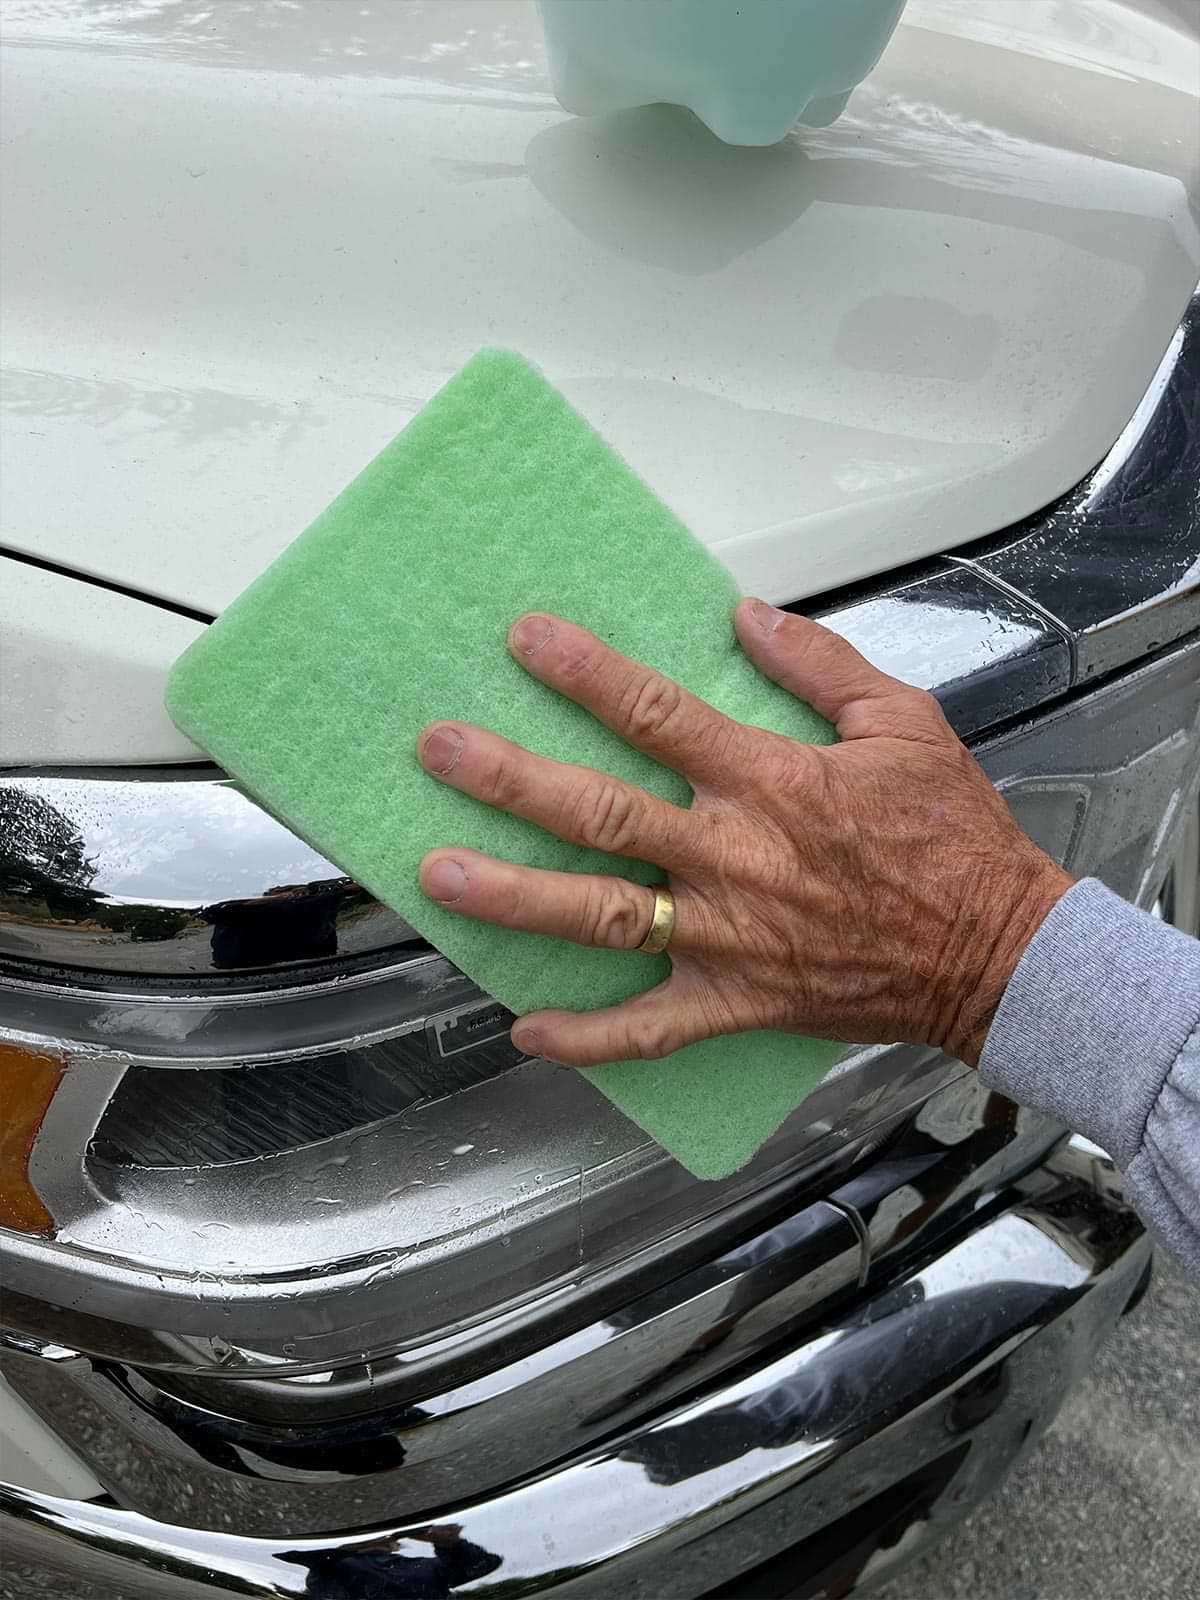 a Boss Love Bug Eraser pad is used to wipe the front grill area of a vehicle